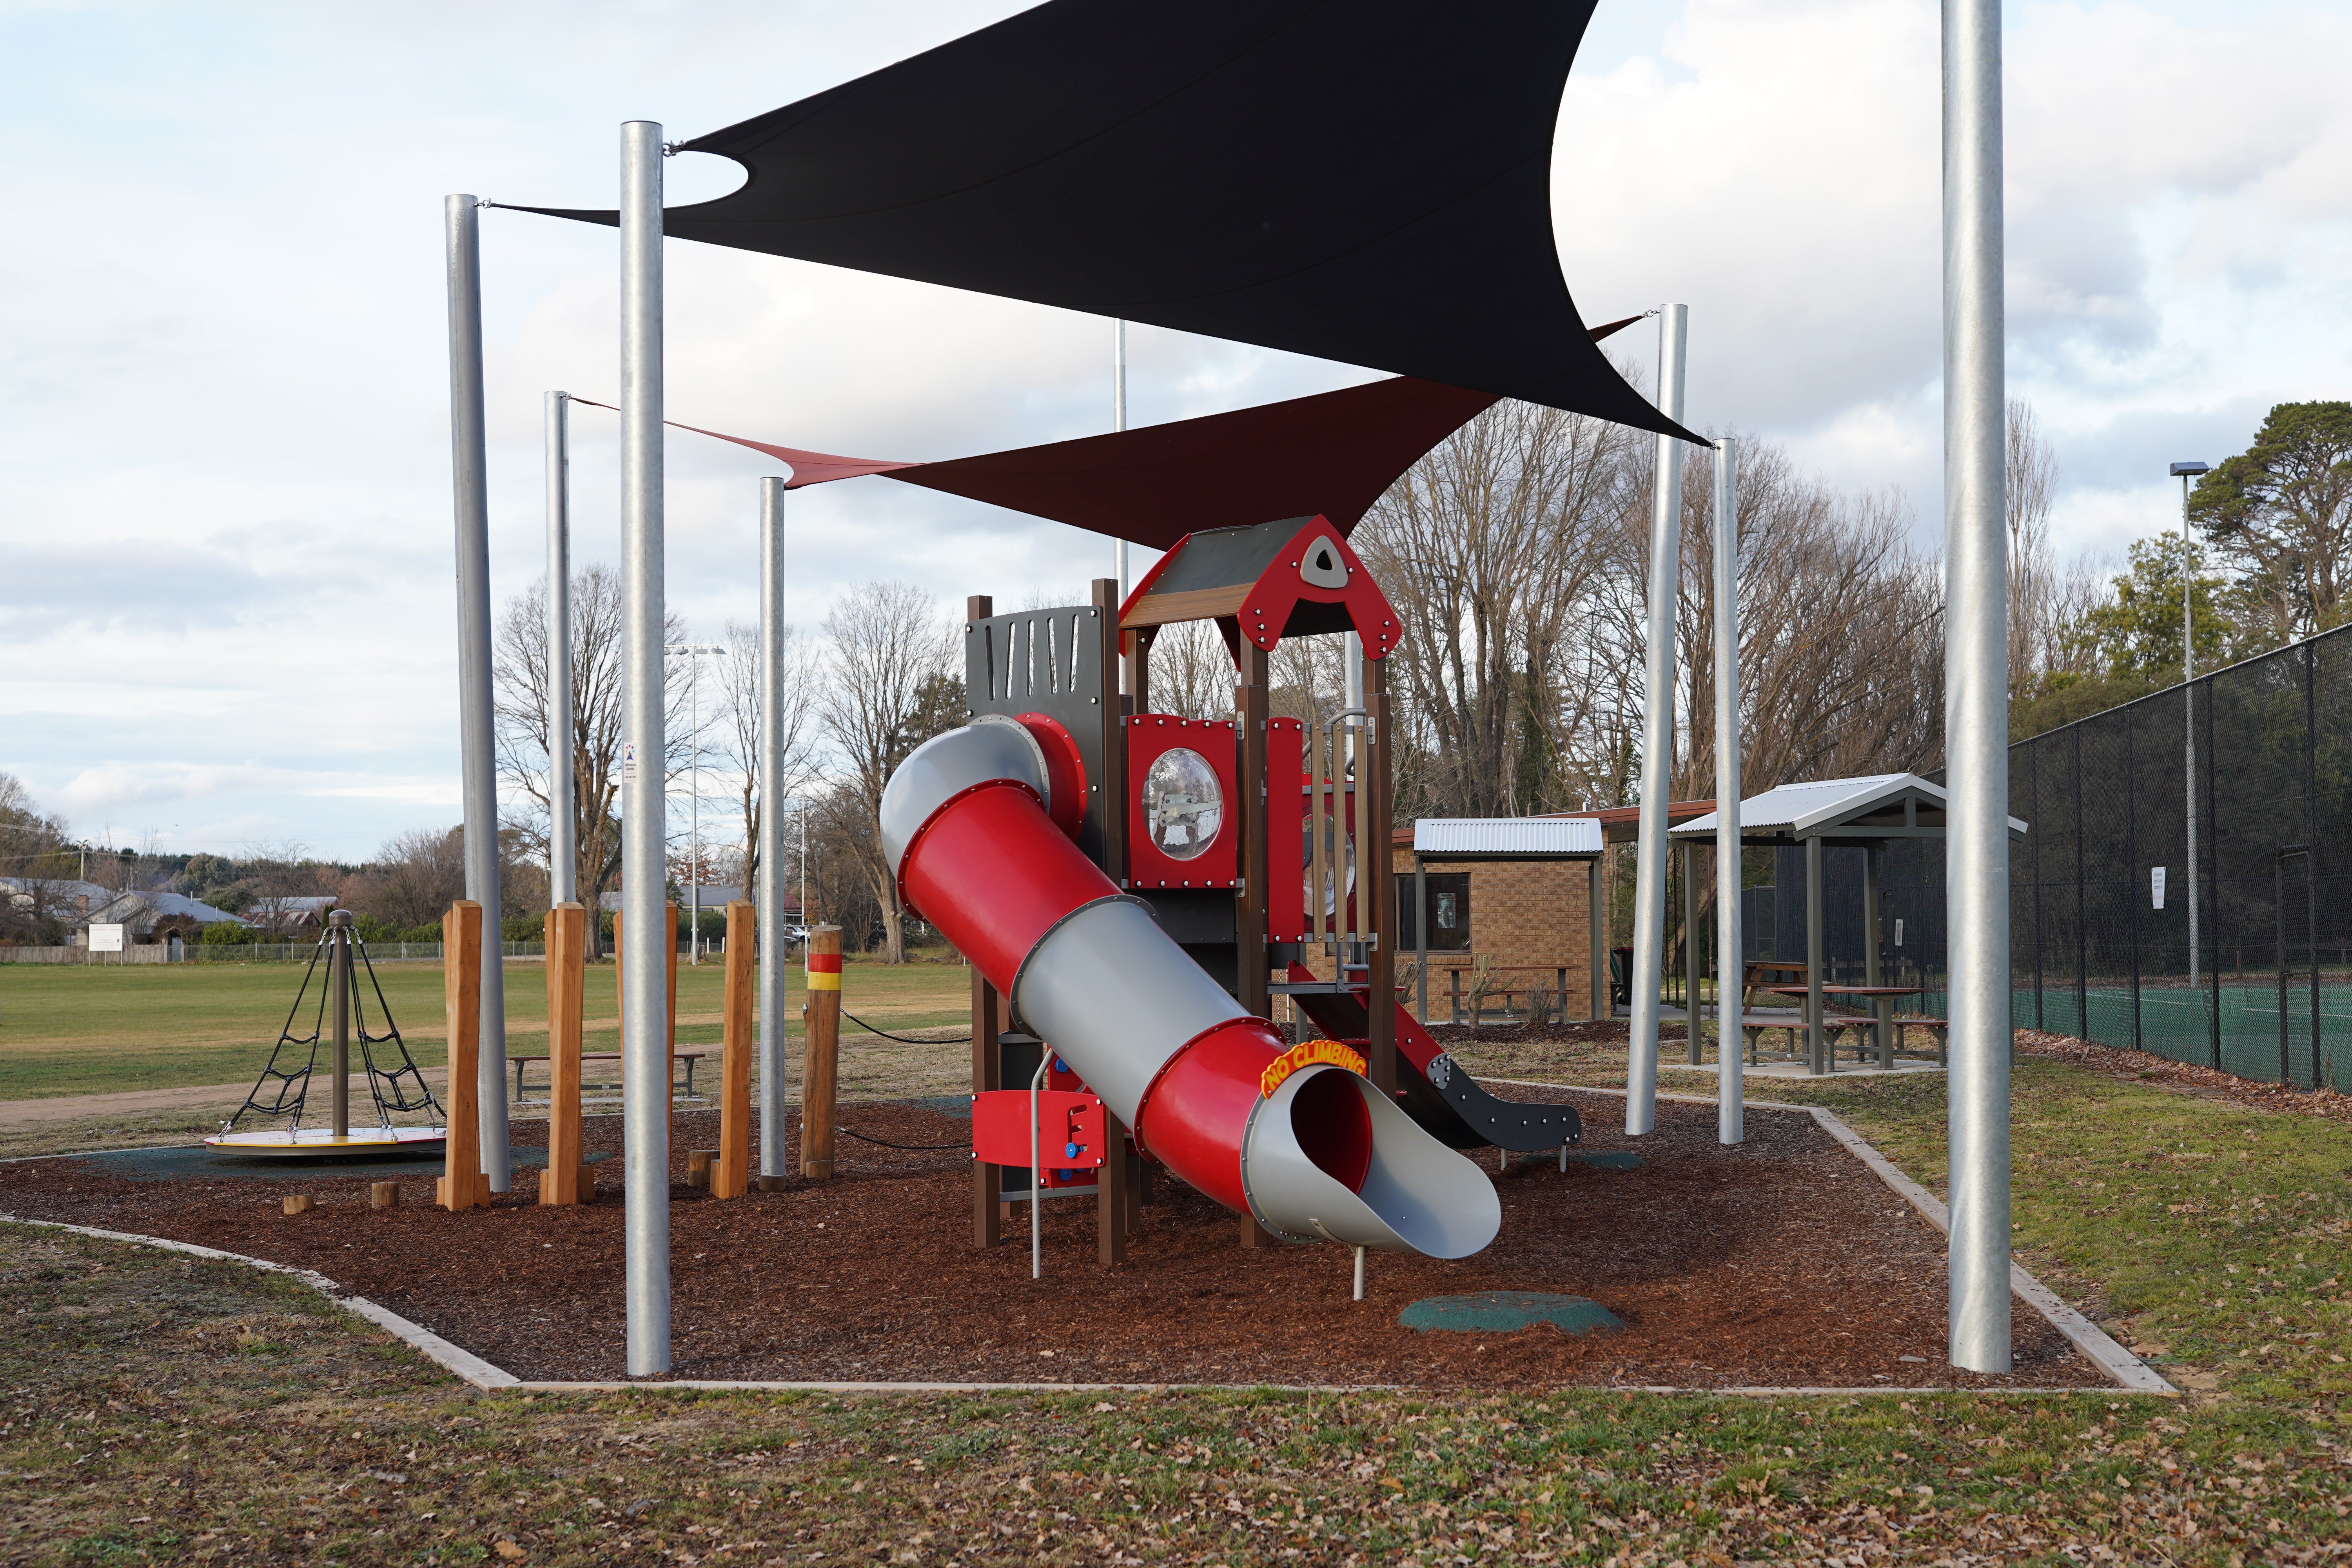 Braidwood Recreation Grounds and Playground - Attractions Melbourne